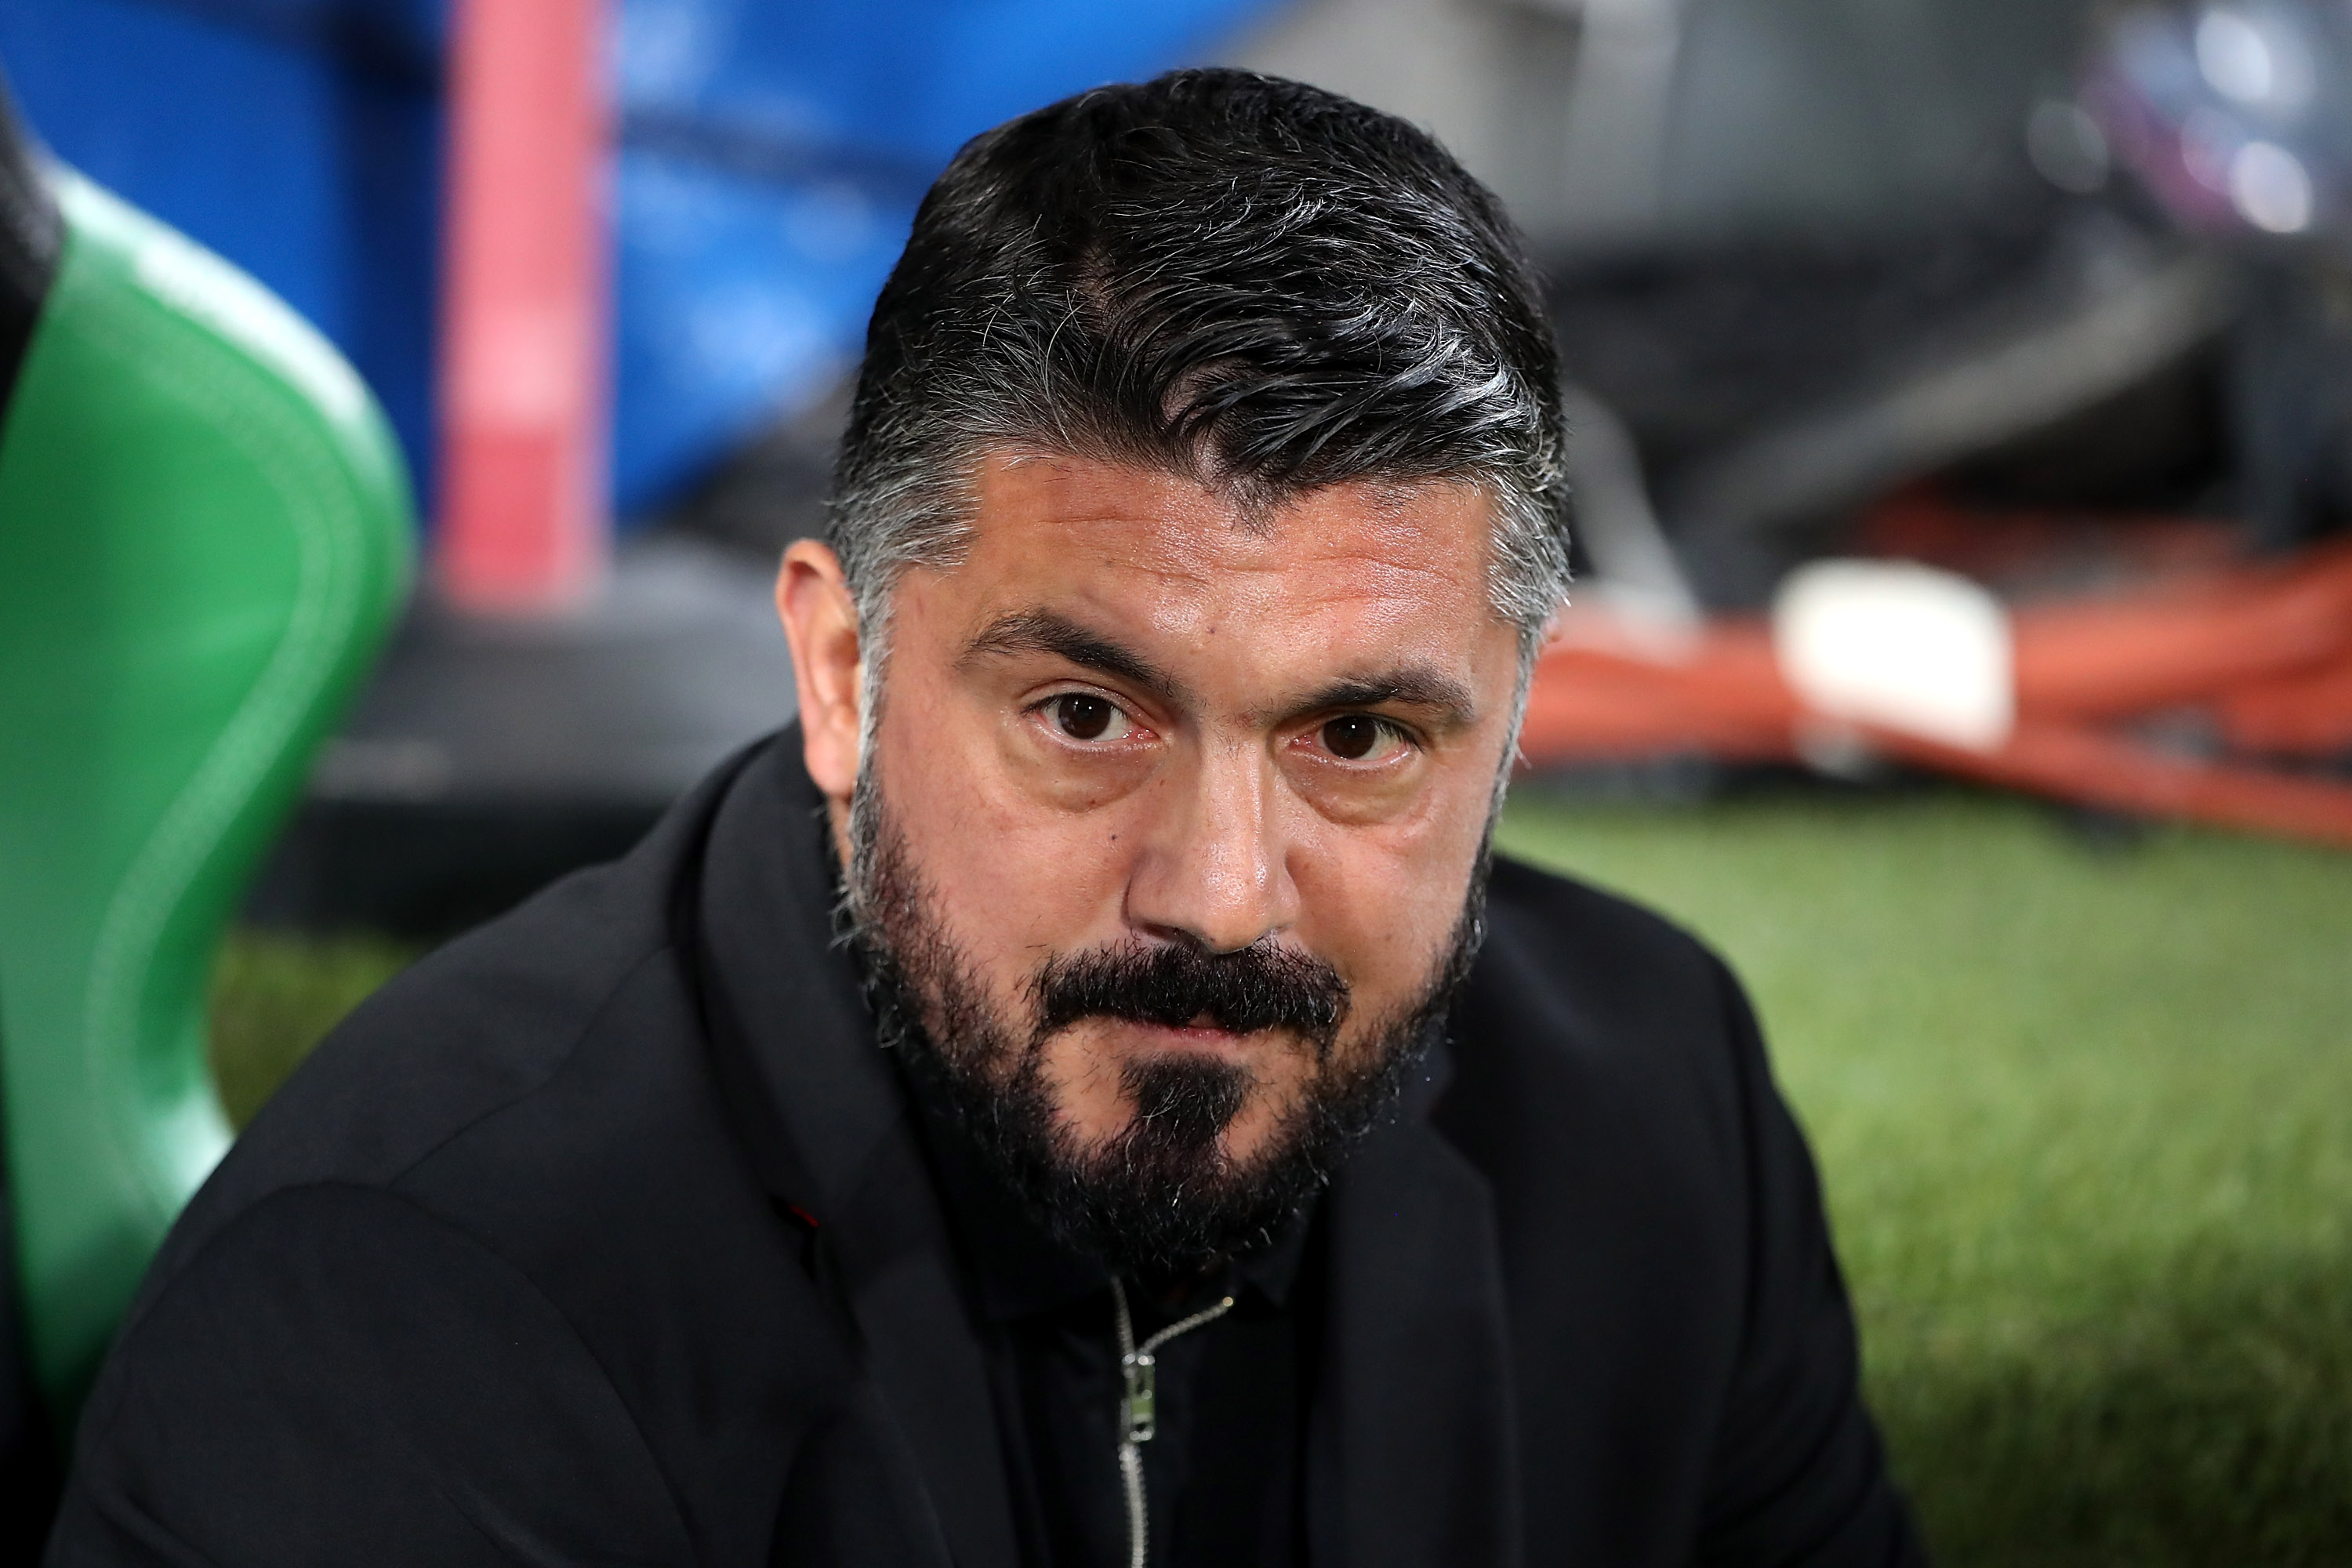 REGGIO NELL'EMILIA, ITALY - SEPTEMBER 30:  AC Milan coach Gennaro Gattuso looks on before the Serie A match between US Sassuolo and AC Milan at Mapei Stadium - Citta' del Tricolore on September 30, 2018 in Reggio nell'Emilia, Italy.  (Photo by Marco Luzzani/Getty Images)